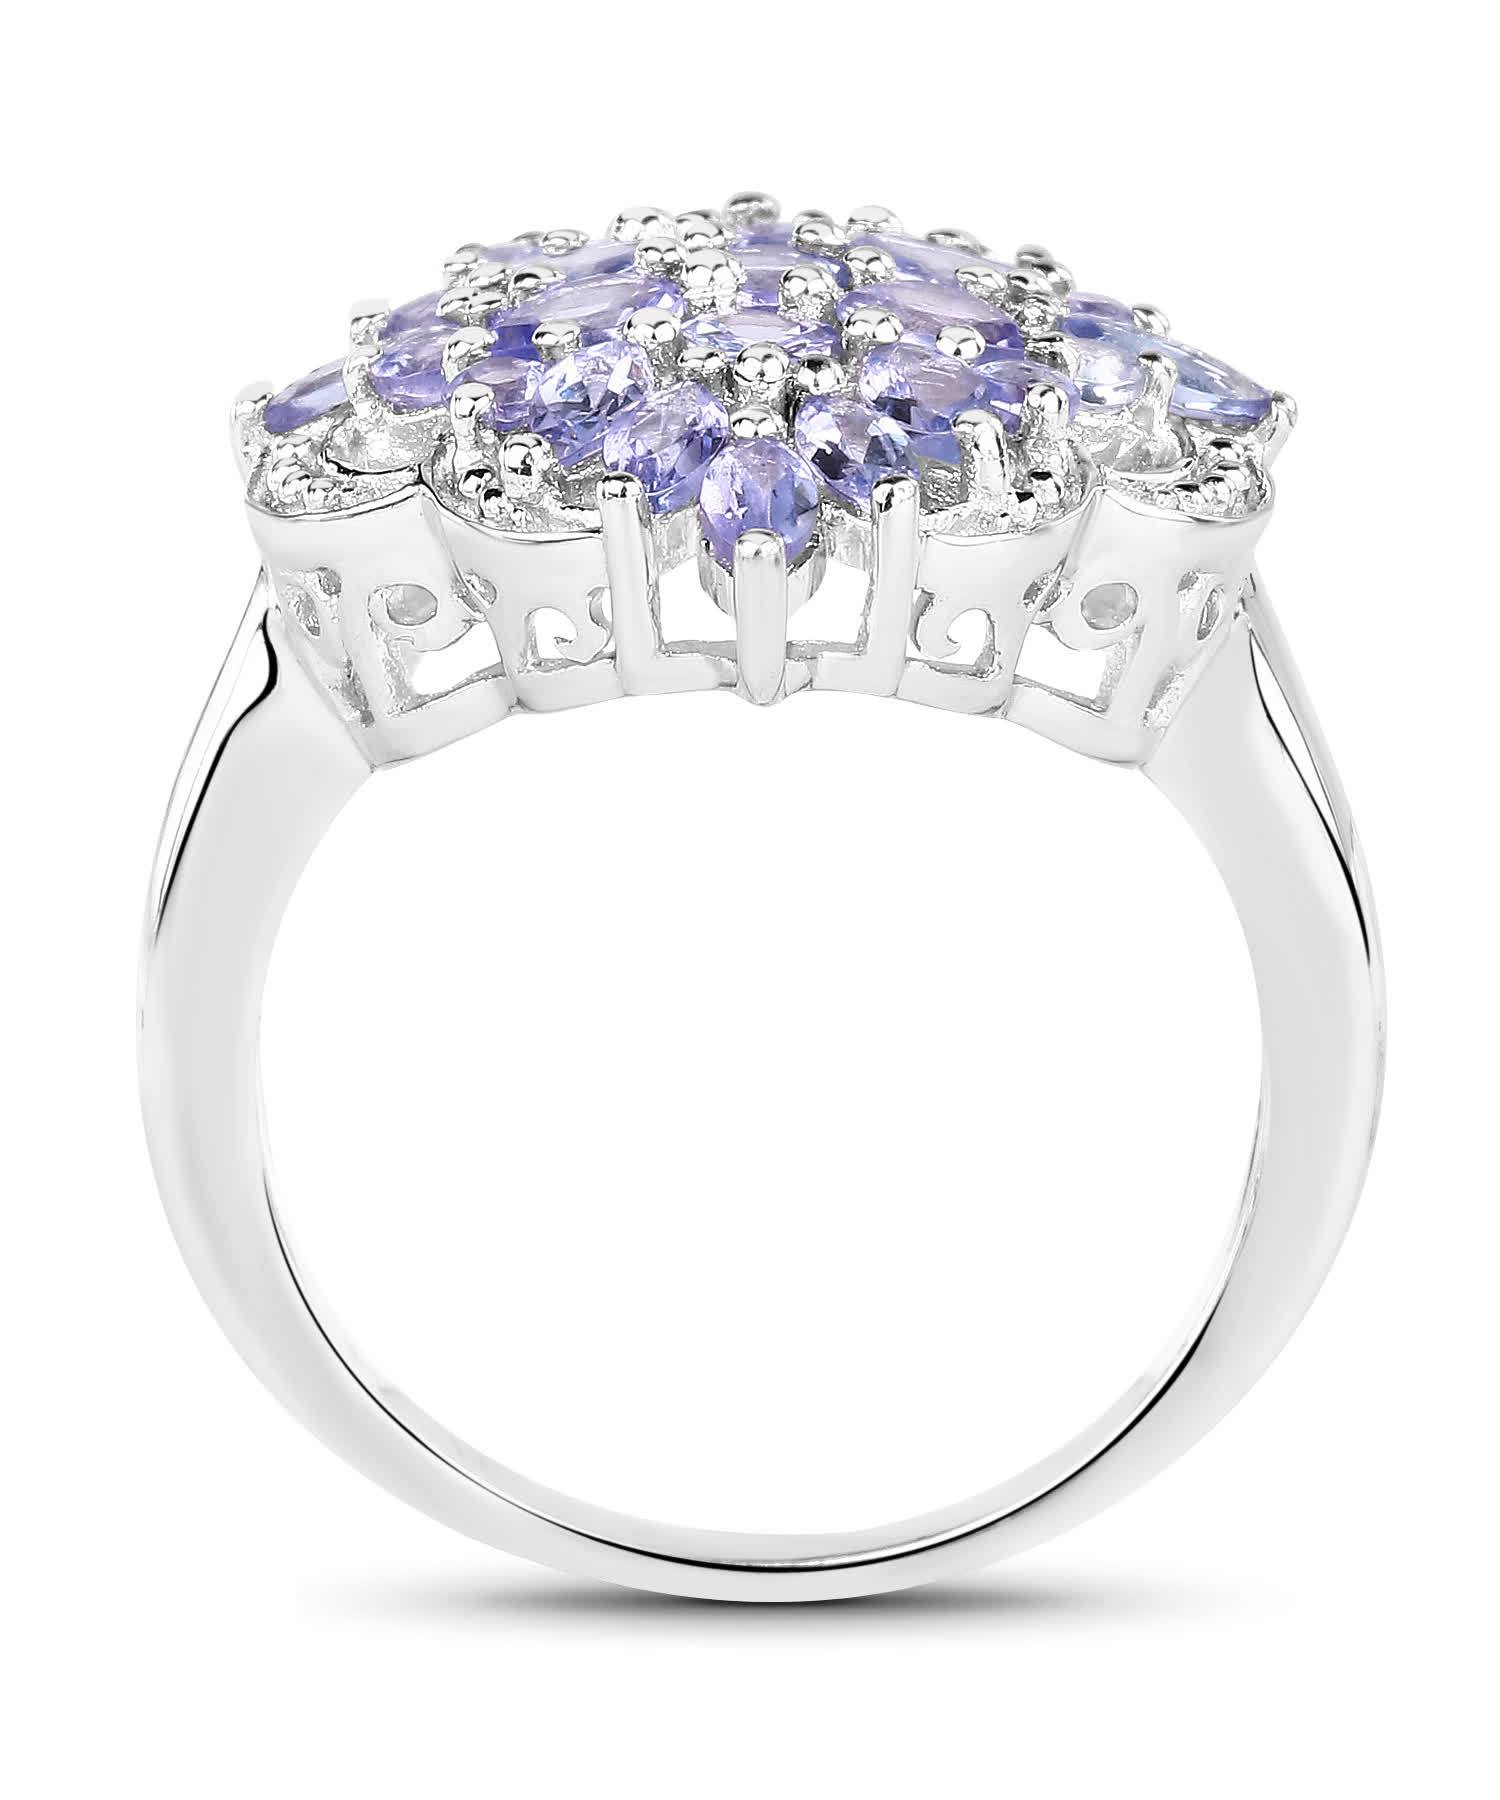 2.18ctw Natural Tanzanite Rhodium Plated 925 Sterling Silver Flower Cocktail Ring View 2